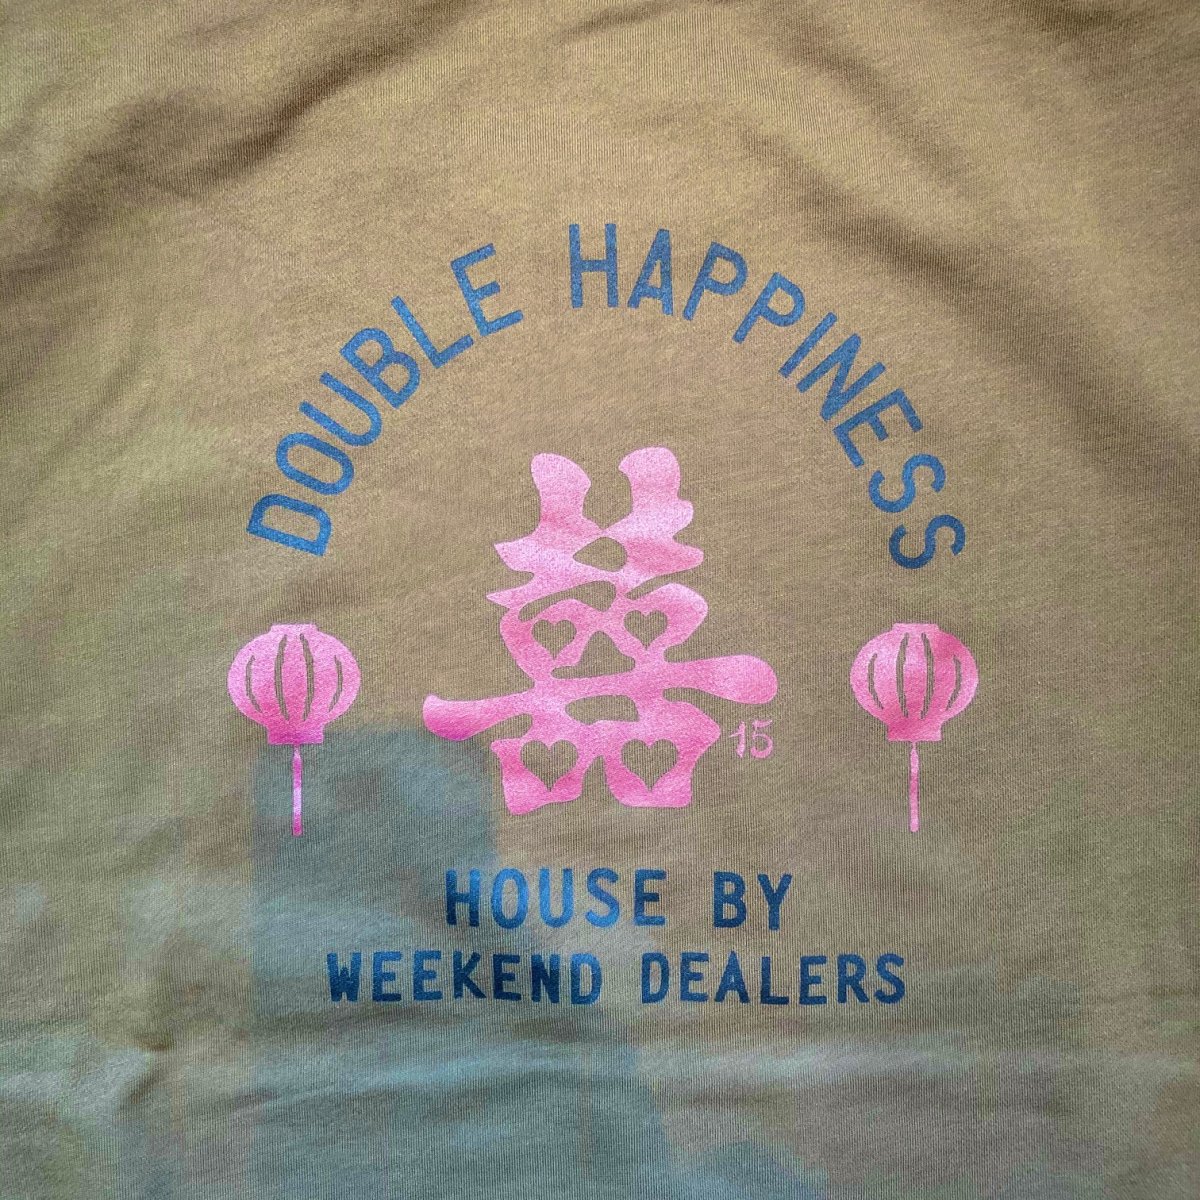 <img class='new_mark_img1' src='https://img.shop-pro.jp/img/new/icons3.gif' style='border:none;display:inline;margin:0px;padding:0px;width:auto;' />Black Weirdos × HOUSE by WEEKEND DEALERS 15th ANNIVERSARYCREW NECK SWEAT 【OLIVE】 